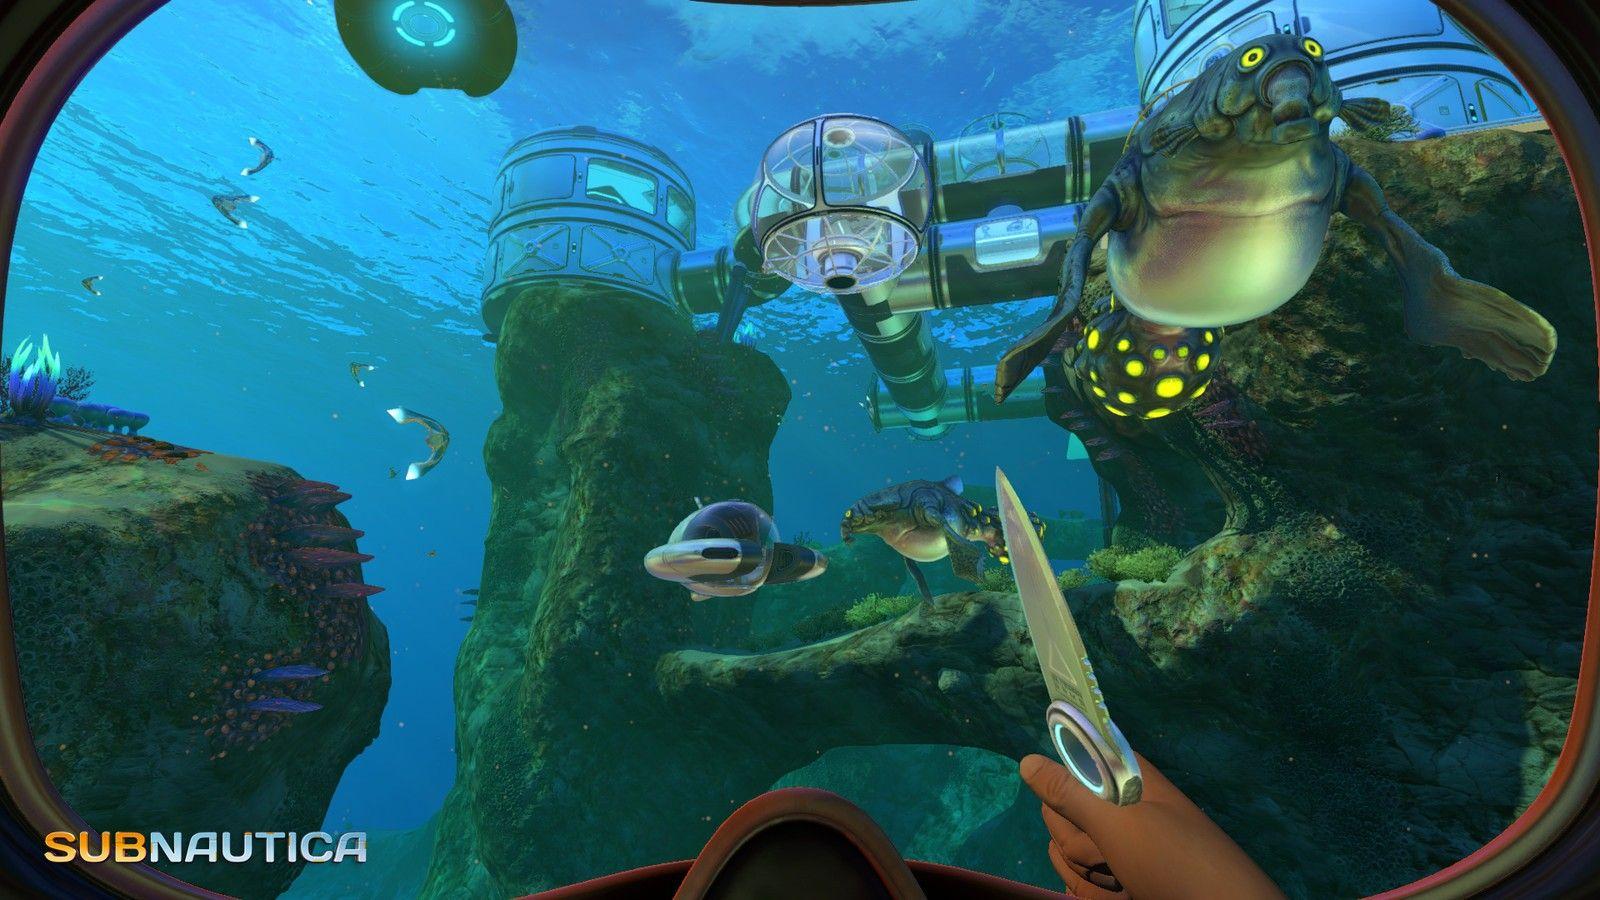 Subnautica for PlayStation 4: Everything you need to know. Android